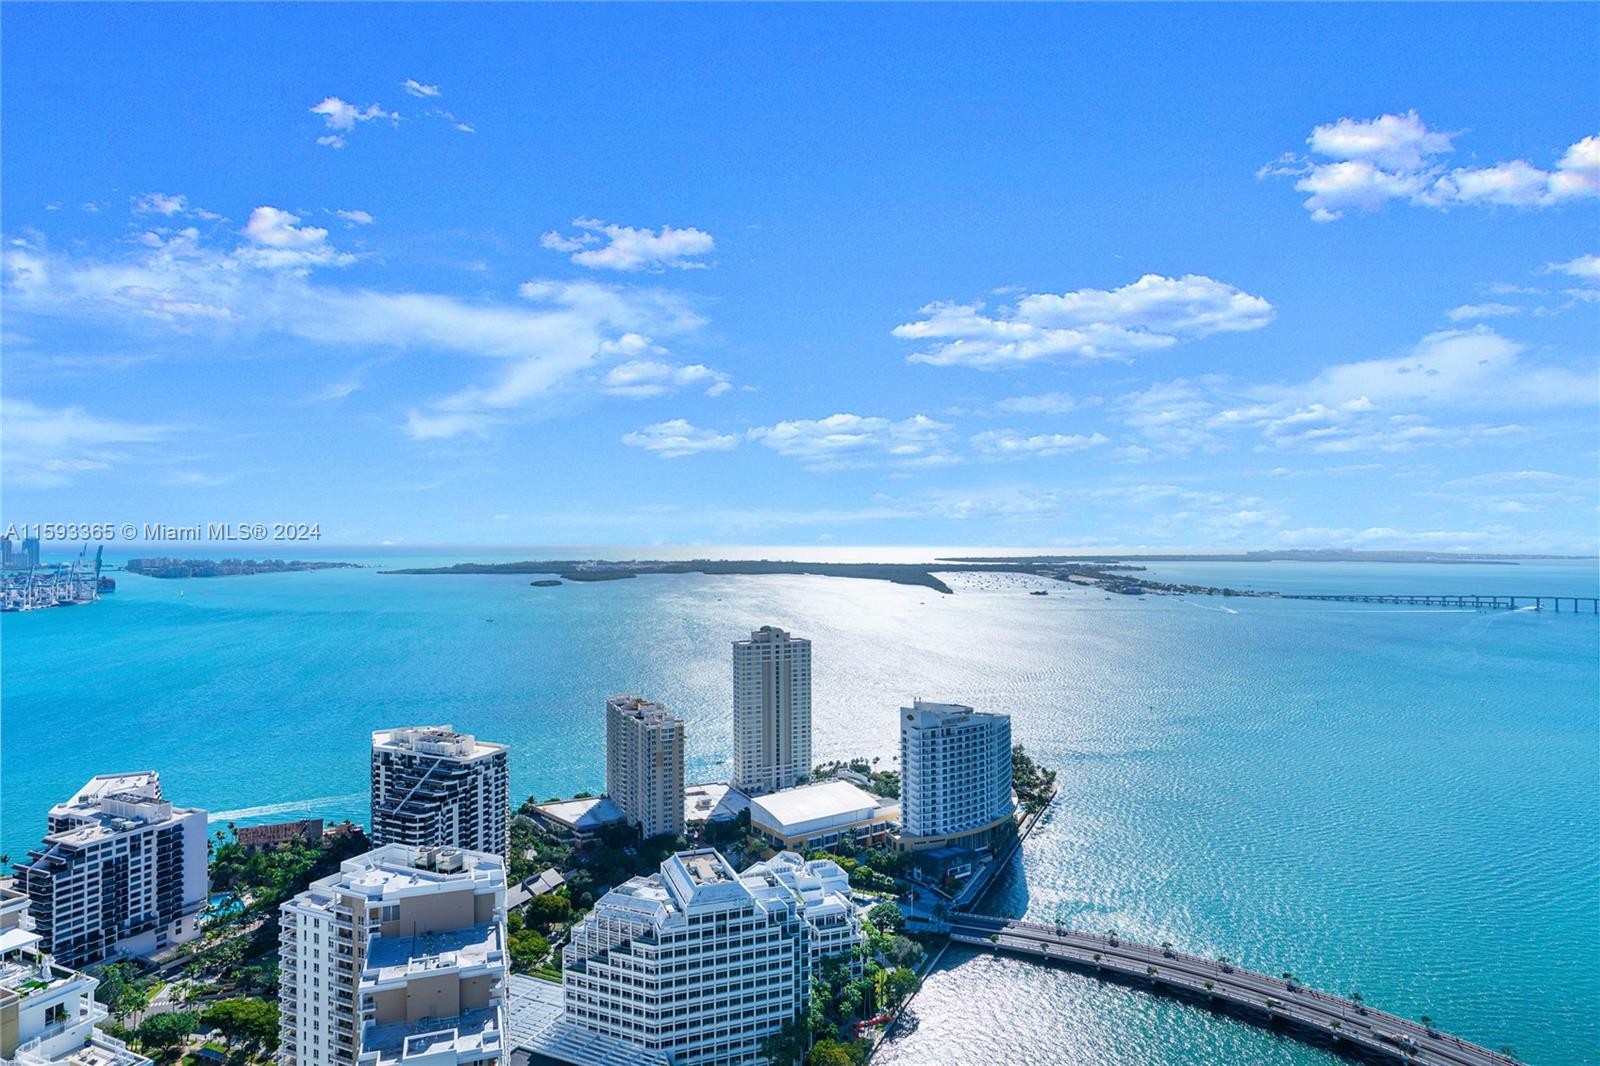 Bright - Corner - High Floor - Fully Furnished Residence @ Icon Brickell, Tower II. This residential condo features BAY Views, 2-bed, 2-bath, 1-Large Den/office, 1,654 sq. ft. living area, 1,922 sq. ft. total area as per developer's floor plan, high end furniture, stainless steel appliances, assigned parking space & more. The building provides water, hot water, basic cable, internet & fitness classes --- **** Proof of funds/income, recent credit score, job, picture ID and any application form completed by all applicants. **** No Pets. No-short term / No Sublease. ****  VACANT & VERY EASY TO SEE  ****  Realtors must accompany their clients  ****  Open to offers!